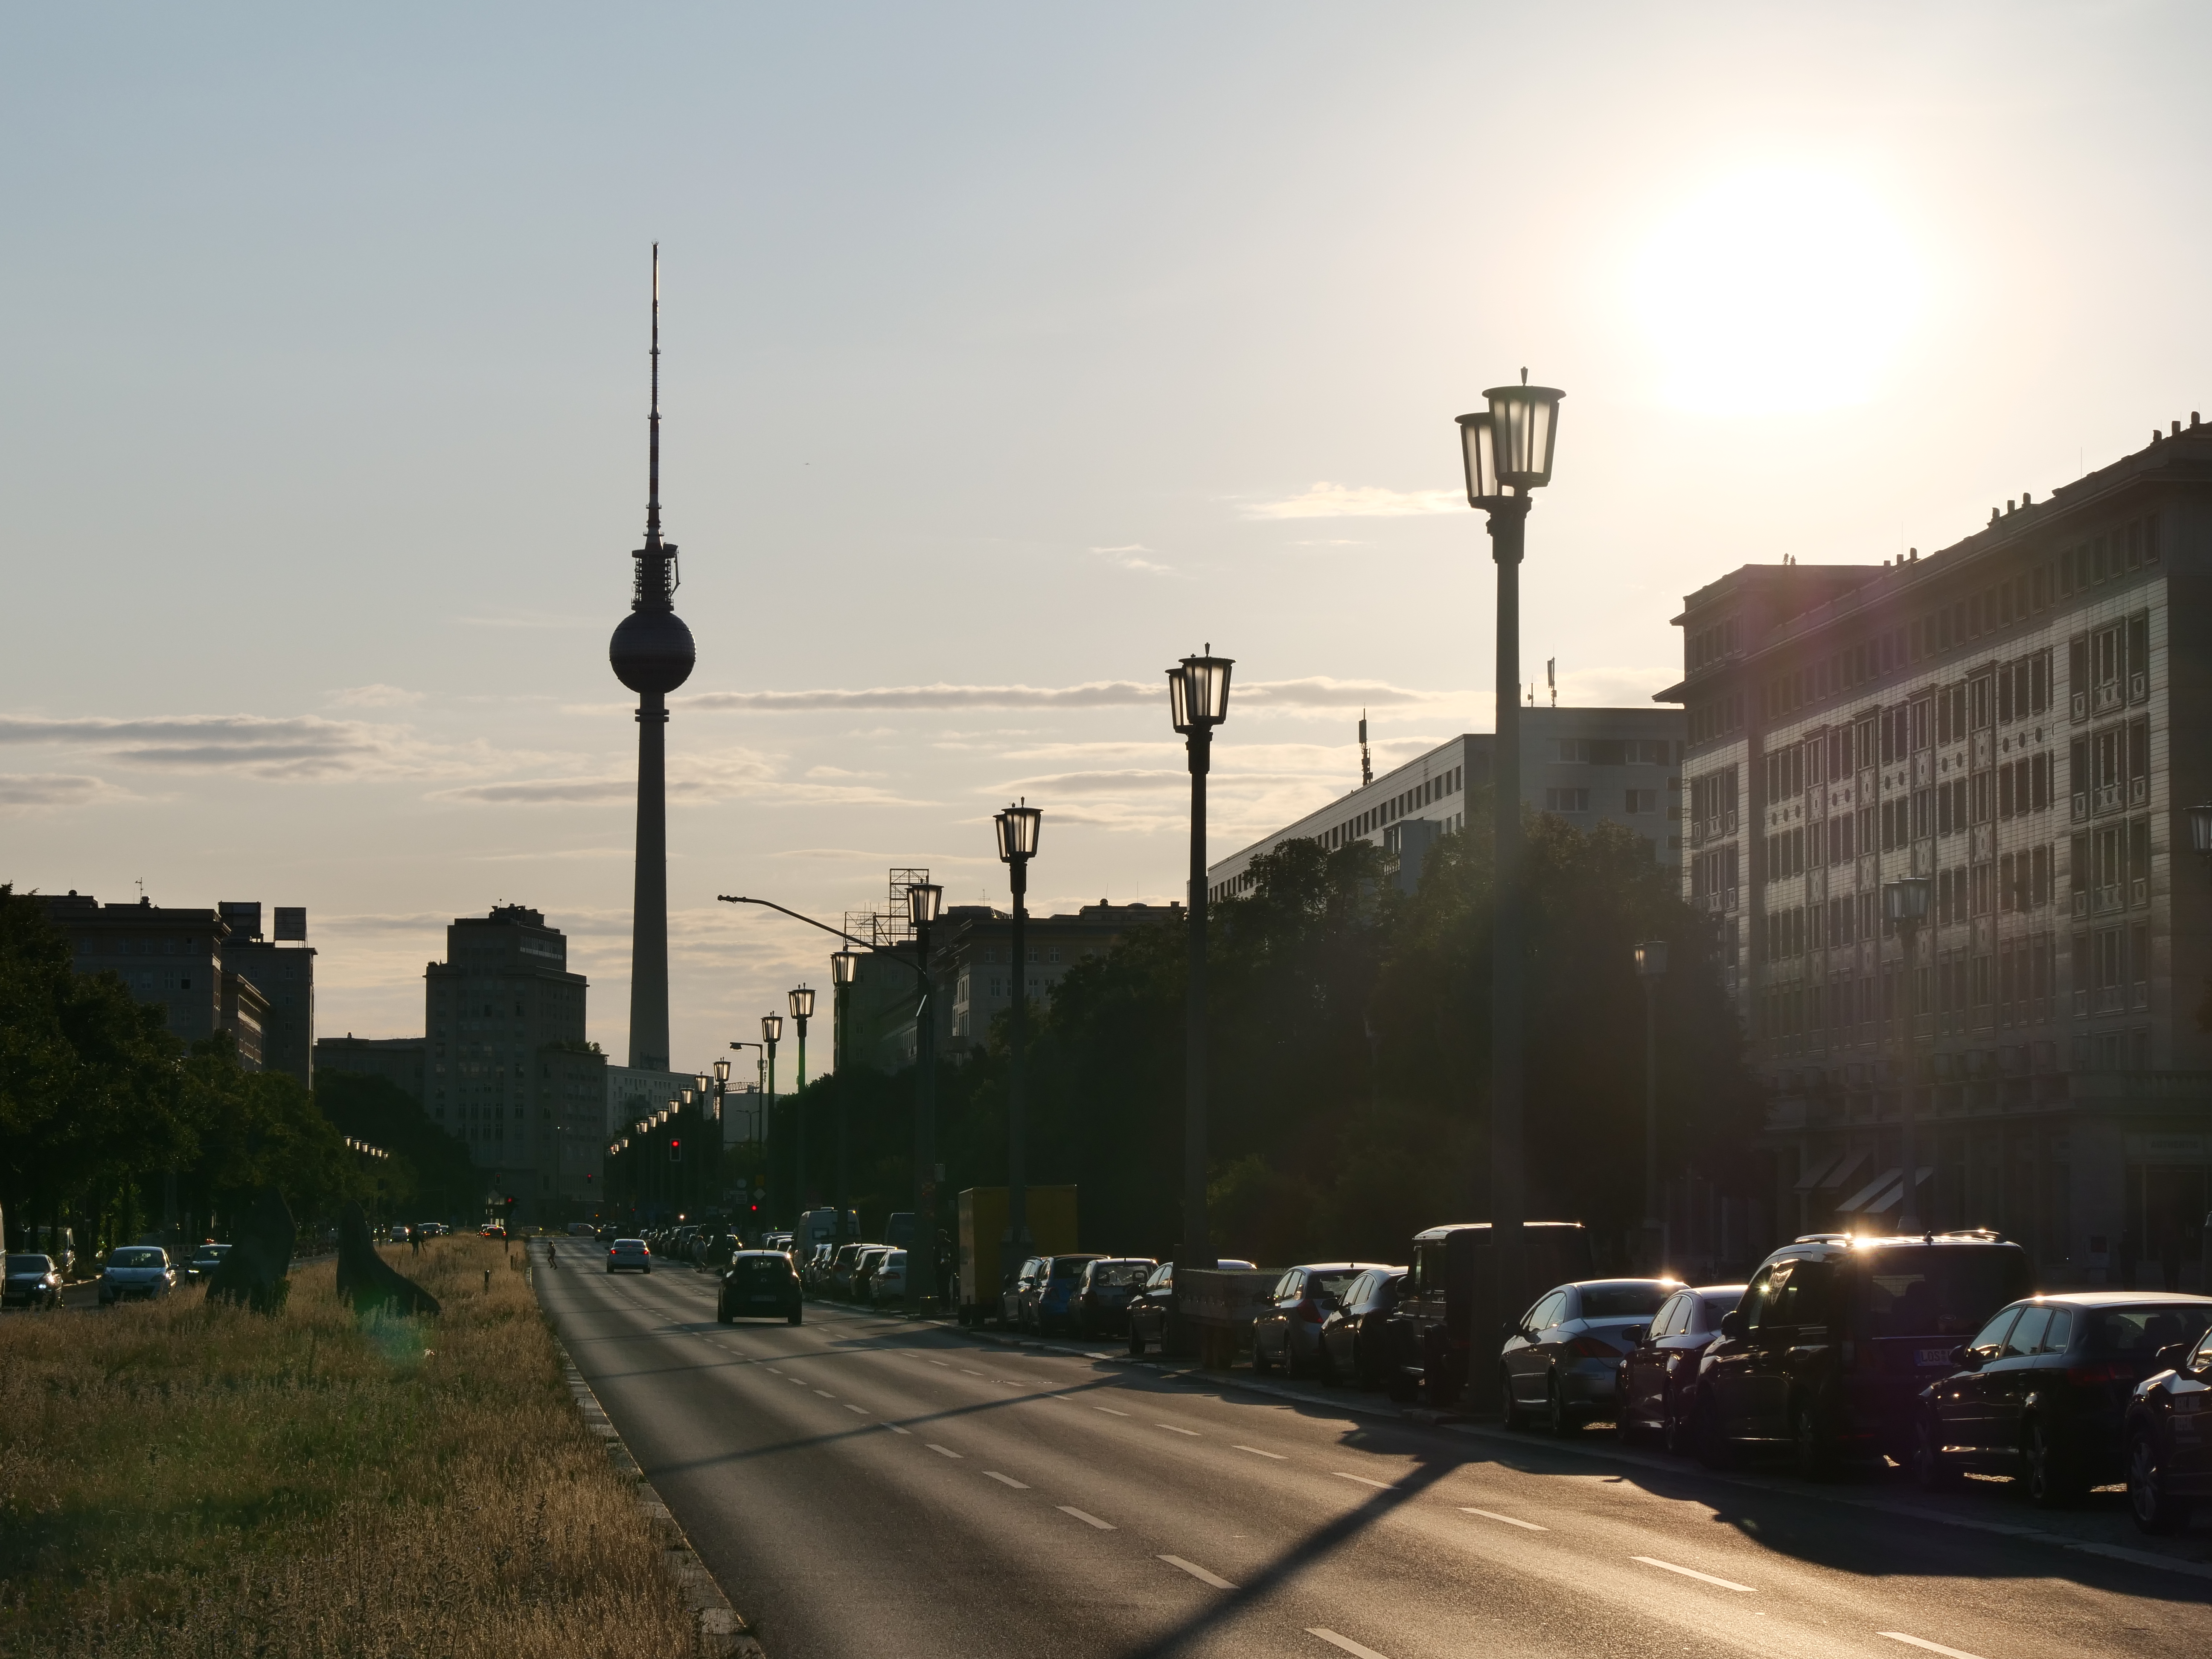 A Berlin street in the shadow of sunset. The television tower can be seen in the background with the cityscape.